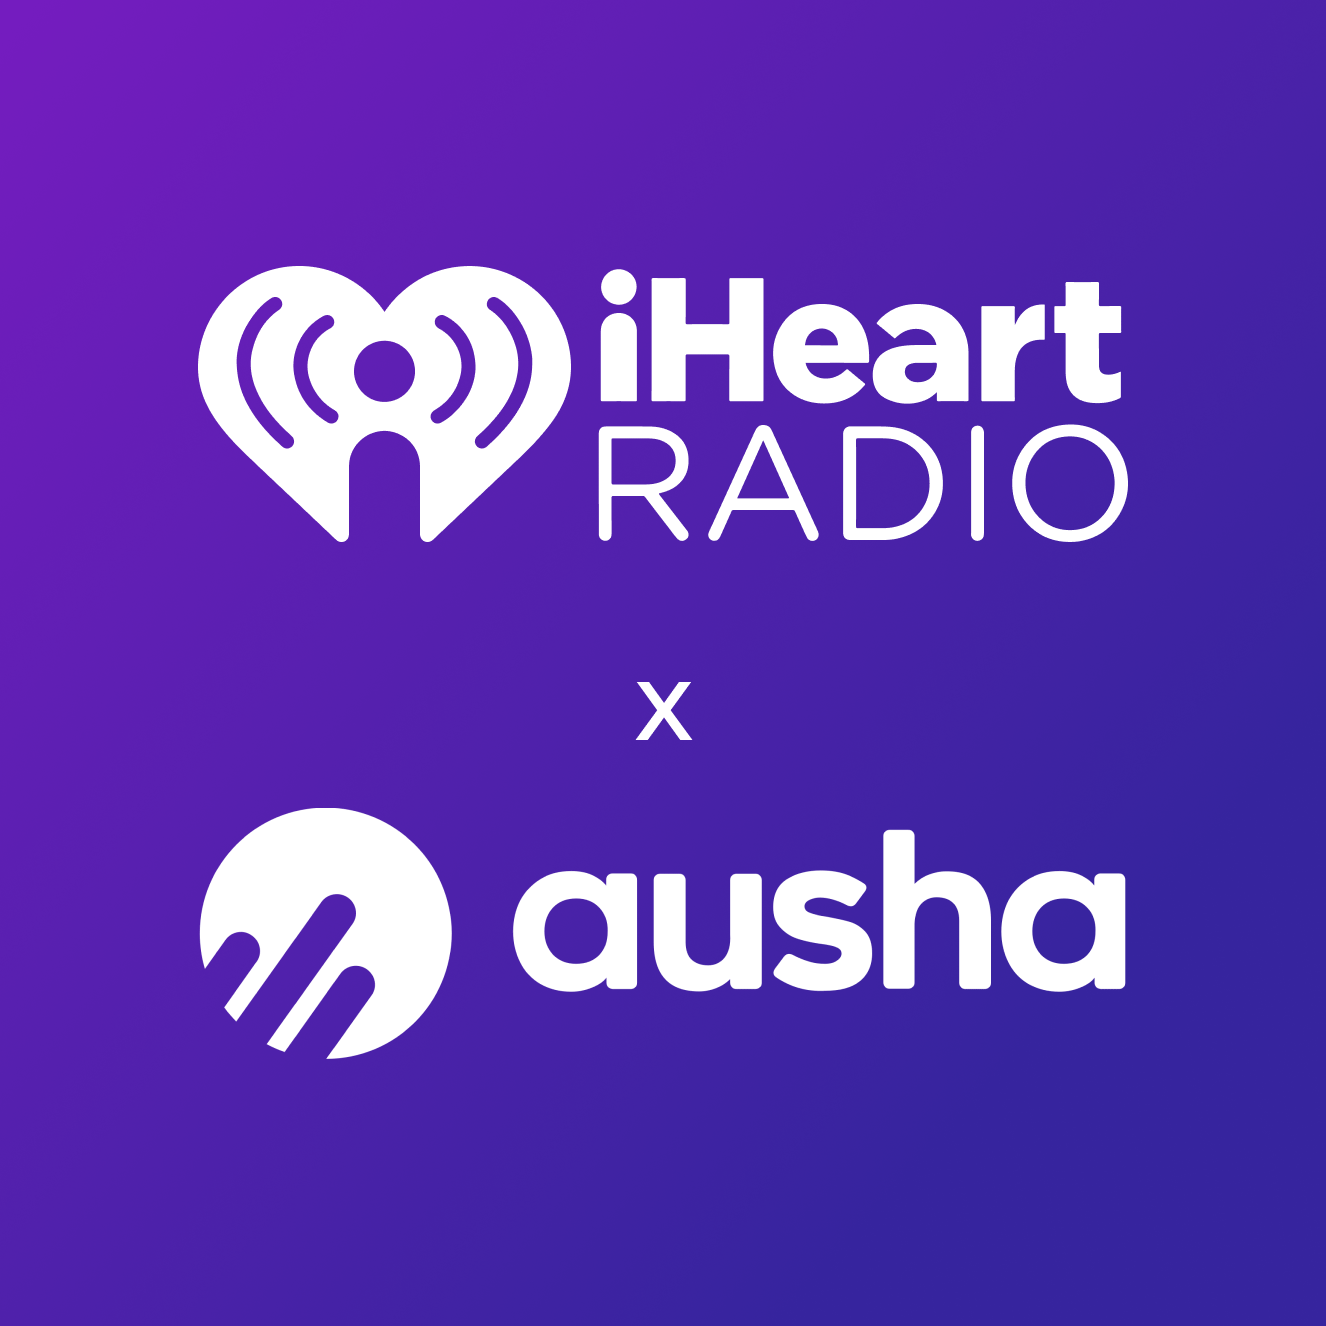 How to Submit Your Podcast to iHeartRadio